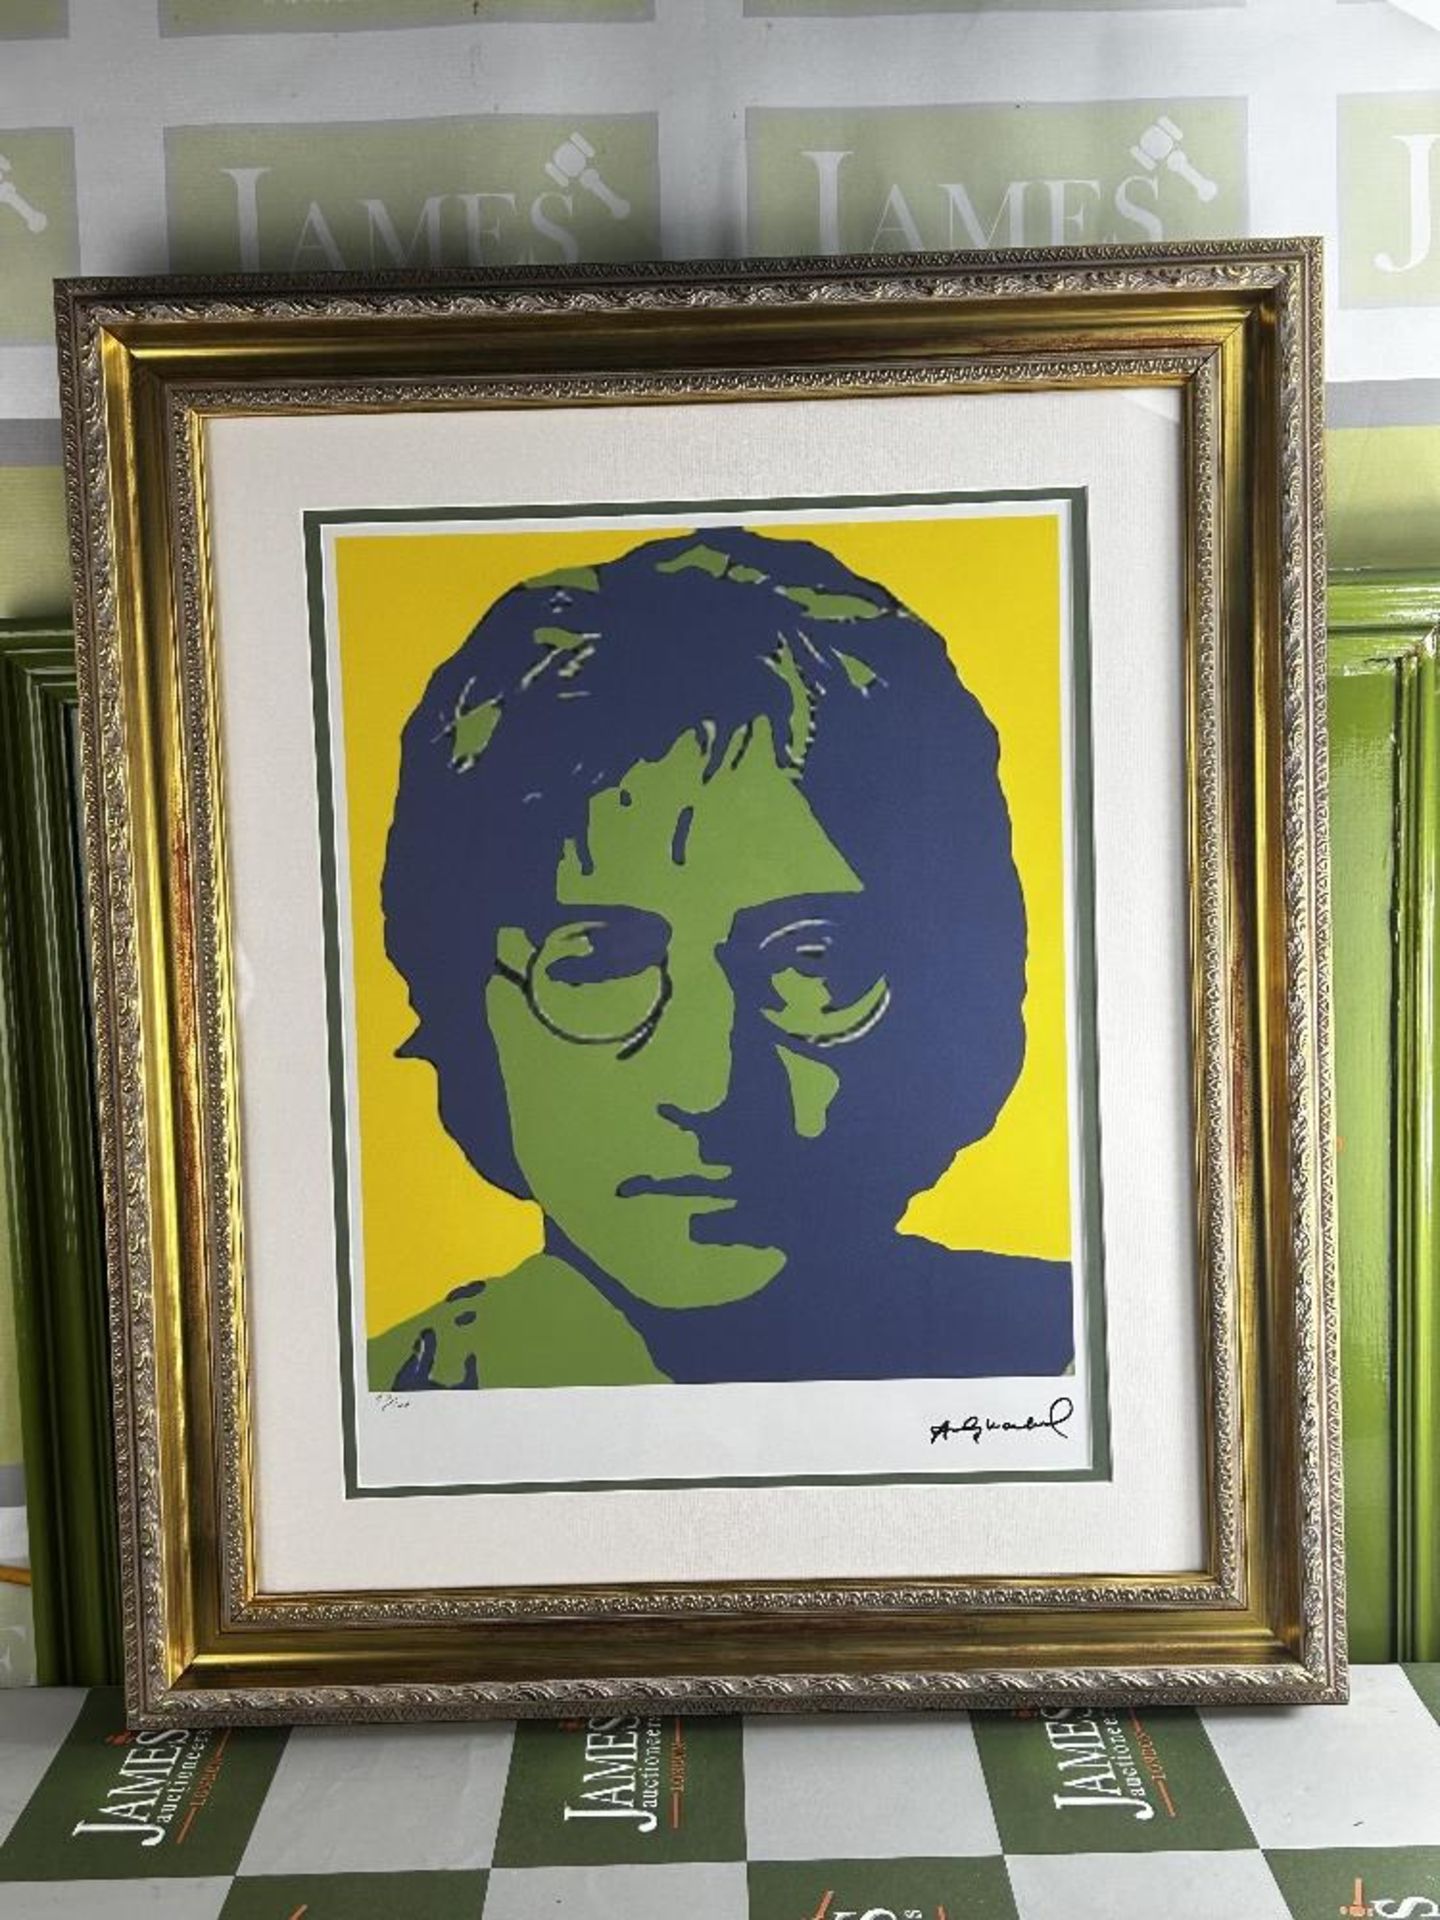 Andy Warhol-(1928-1987) "John Lennon" Numbered Lithograph - Image 7 of 7